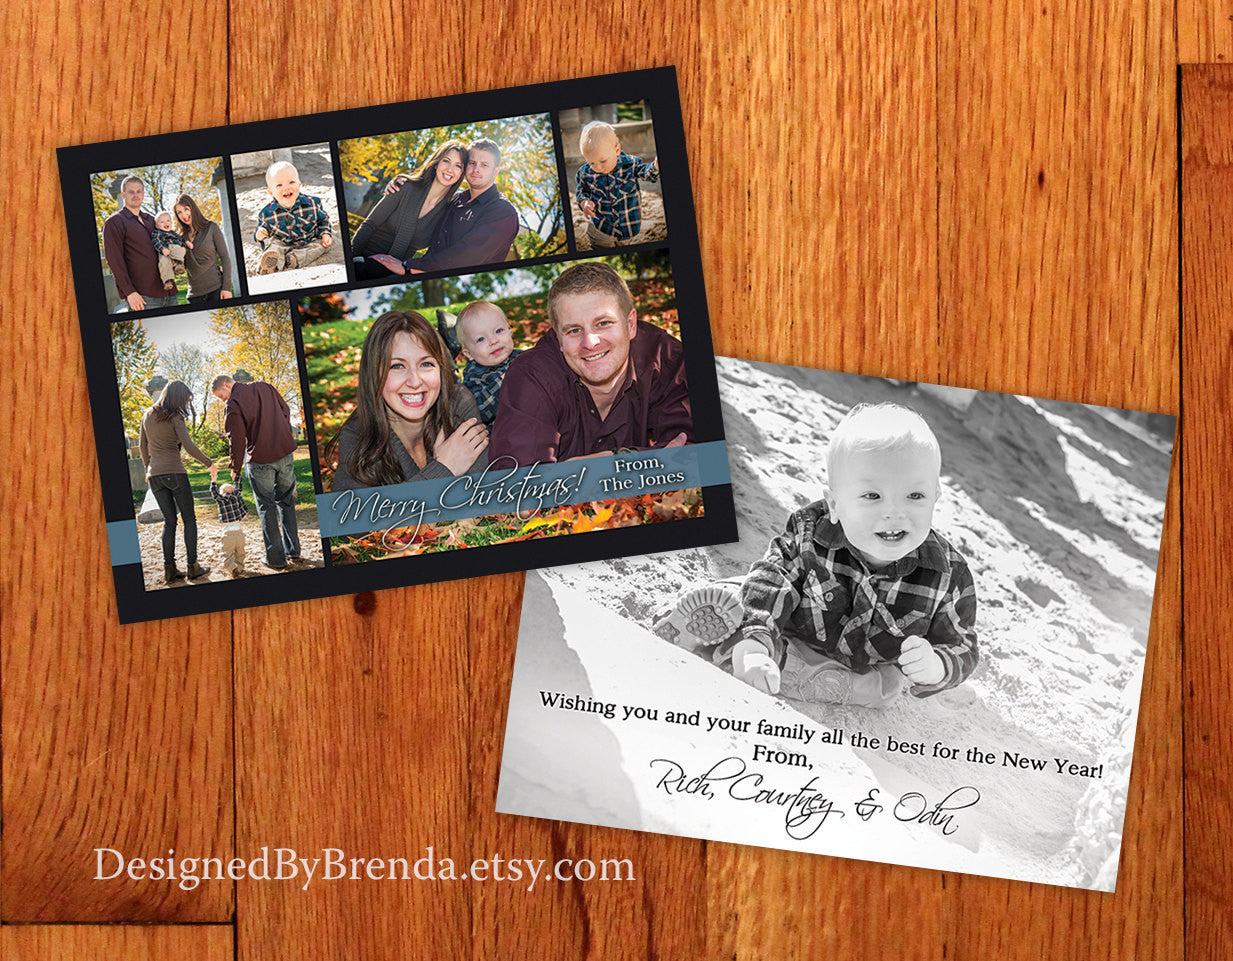 Double Sided Holiday Card with Photo Collage - Modern Feel with Multiple Pictures